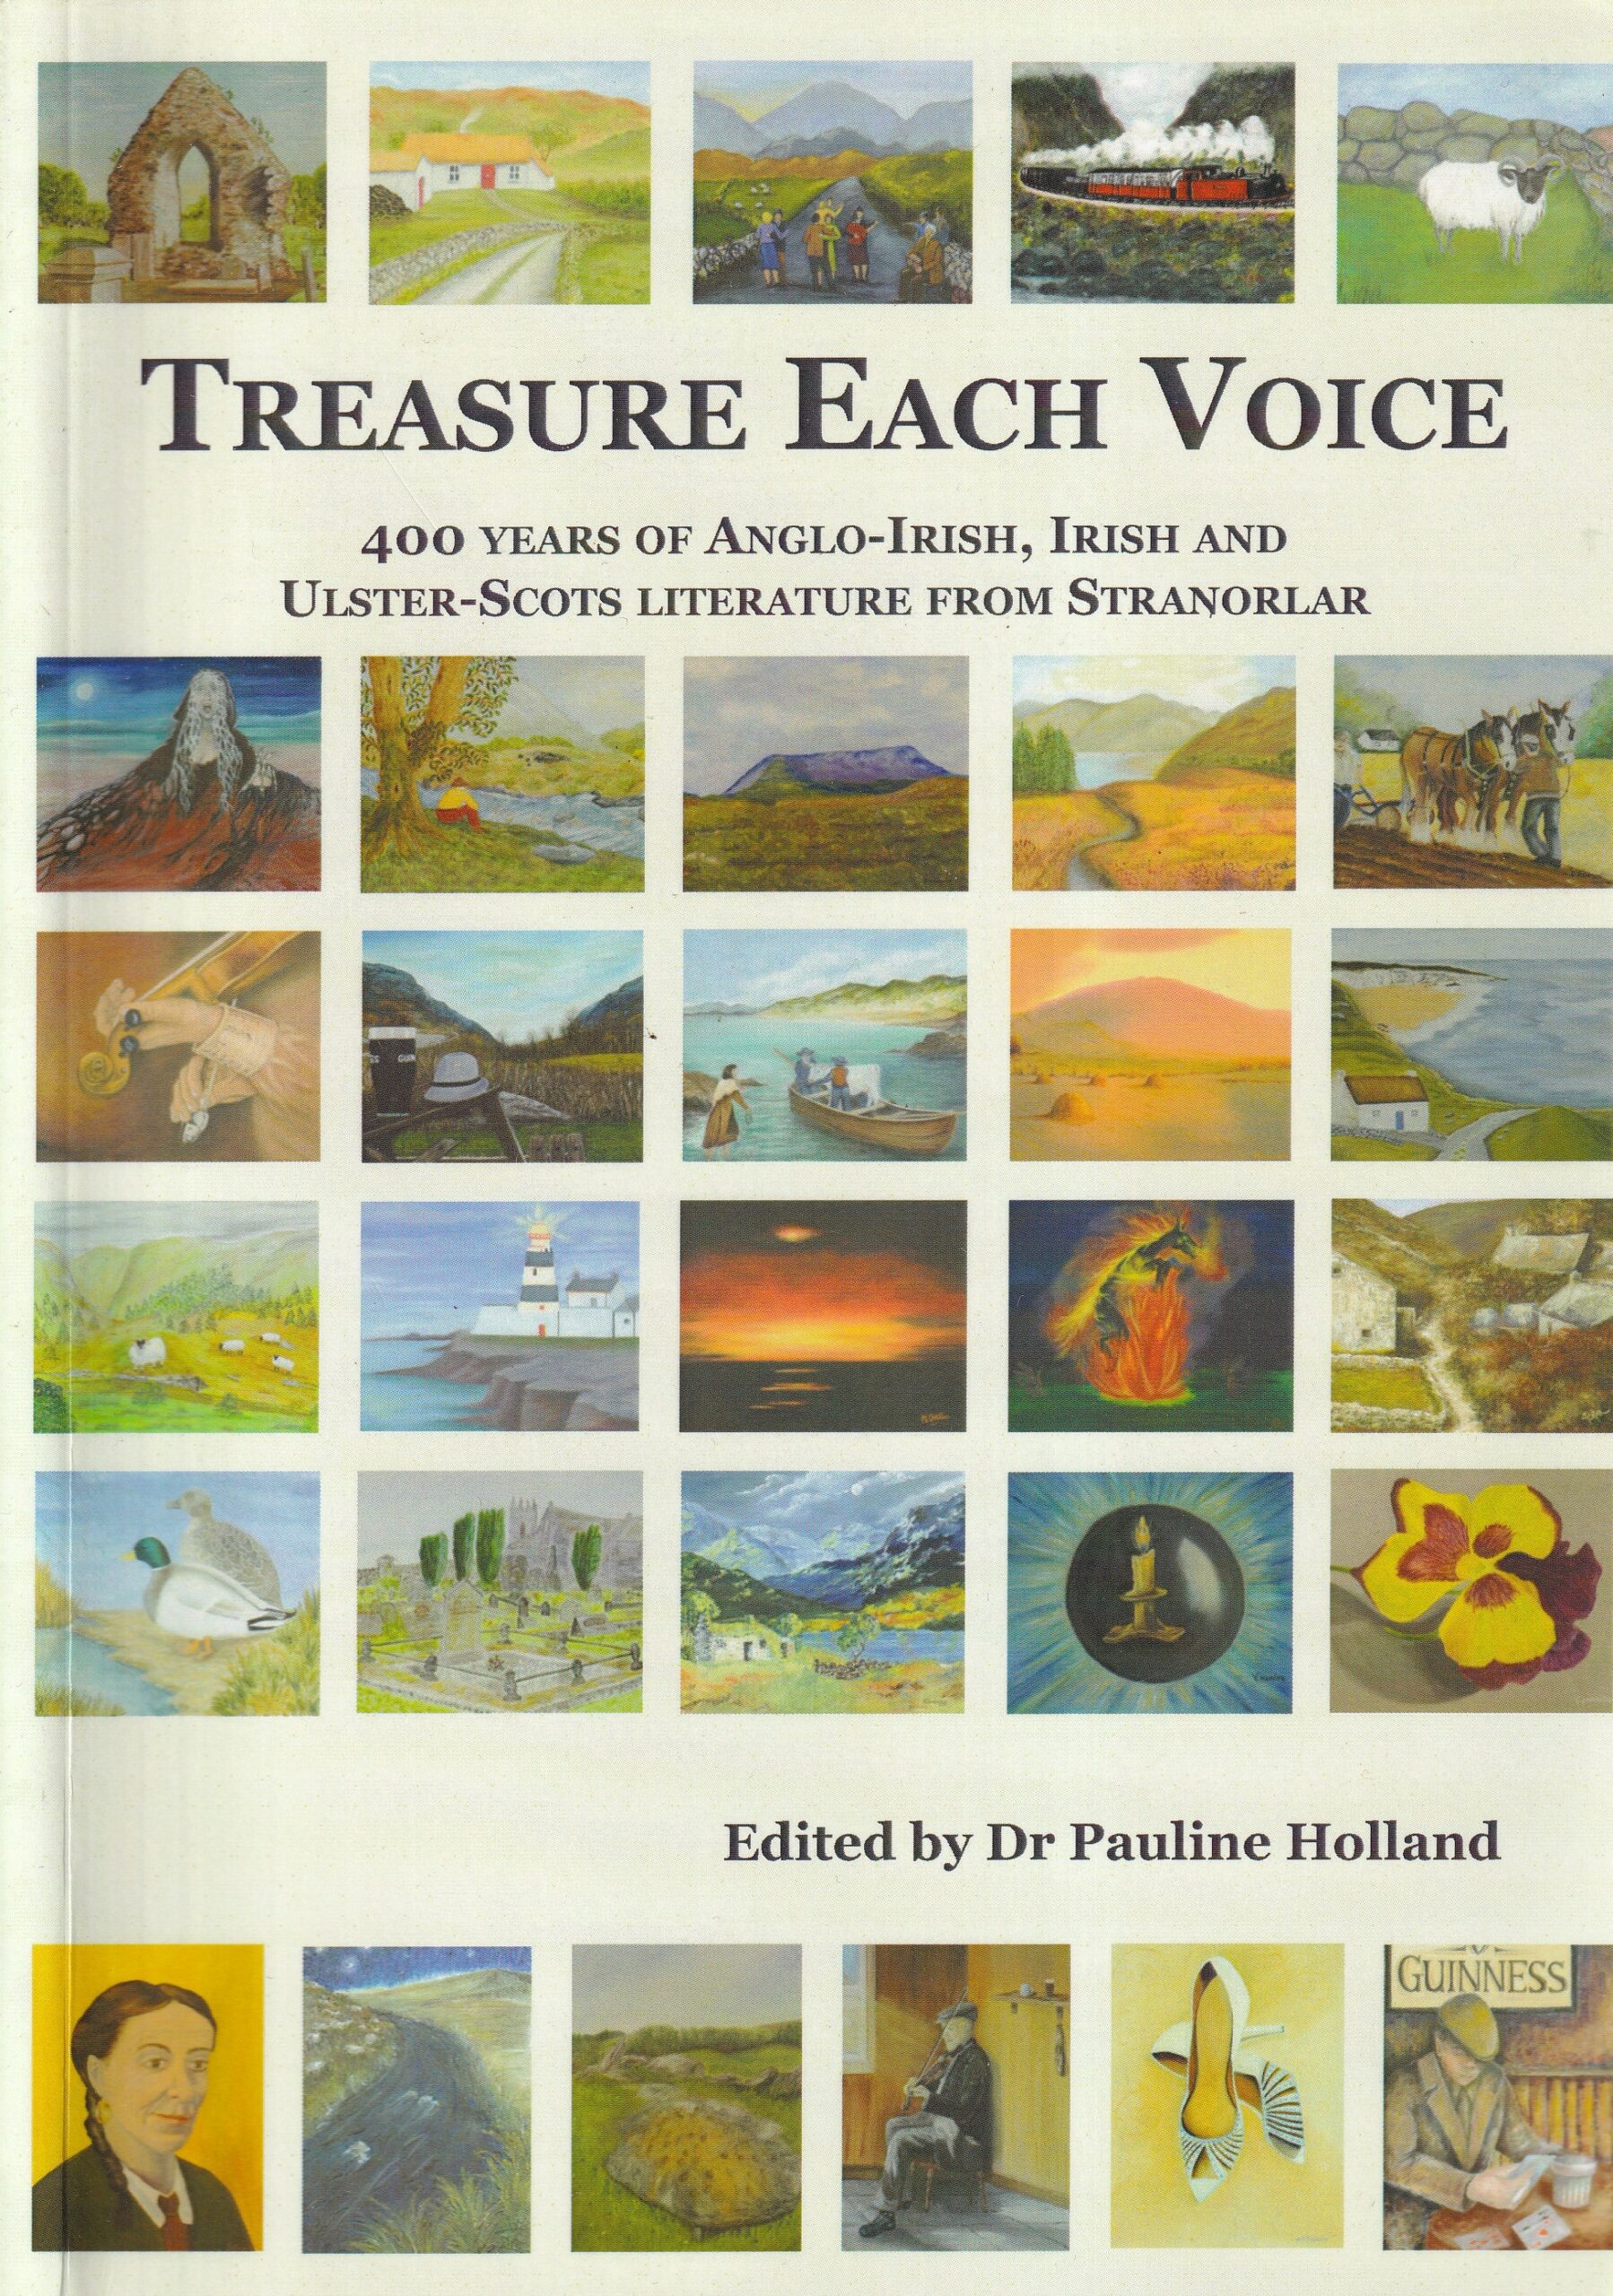 Treasure Each Voice: 400 Years of Anglo- Irish, Irish and Ulster- Scots Literature from Stranorlar | Dr Pauline Holland (ed.) | Charlie Byrne's